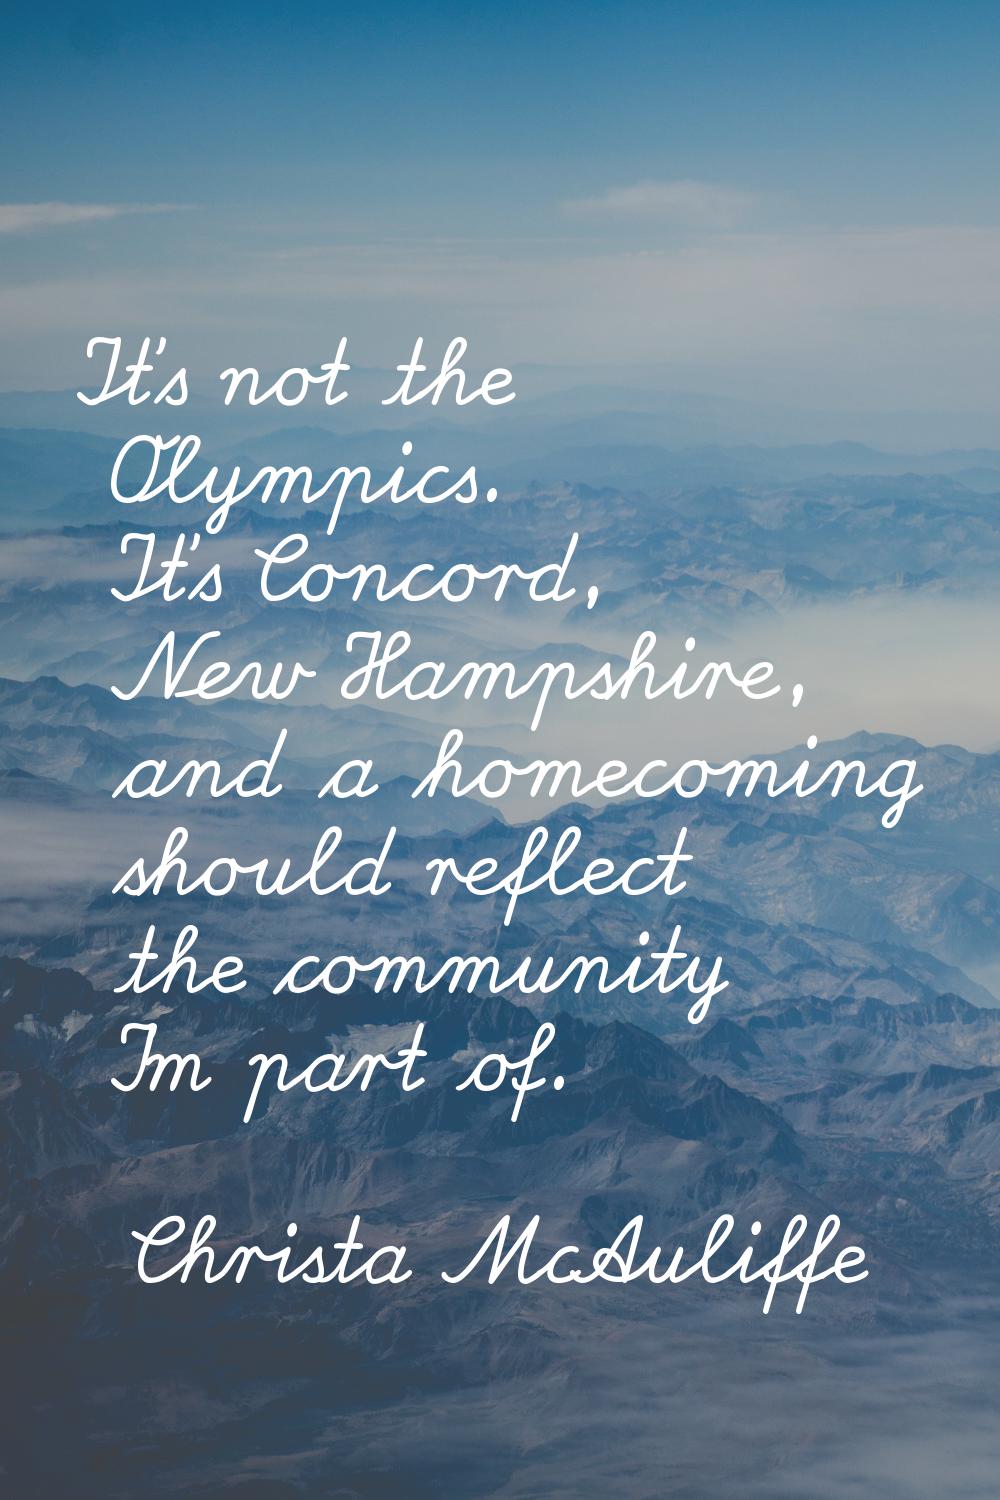 It's not the Olympics. It's Concord, New Hampshire, and a homecoming should reflect the community I